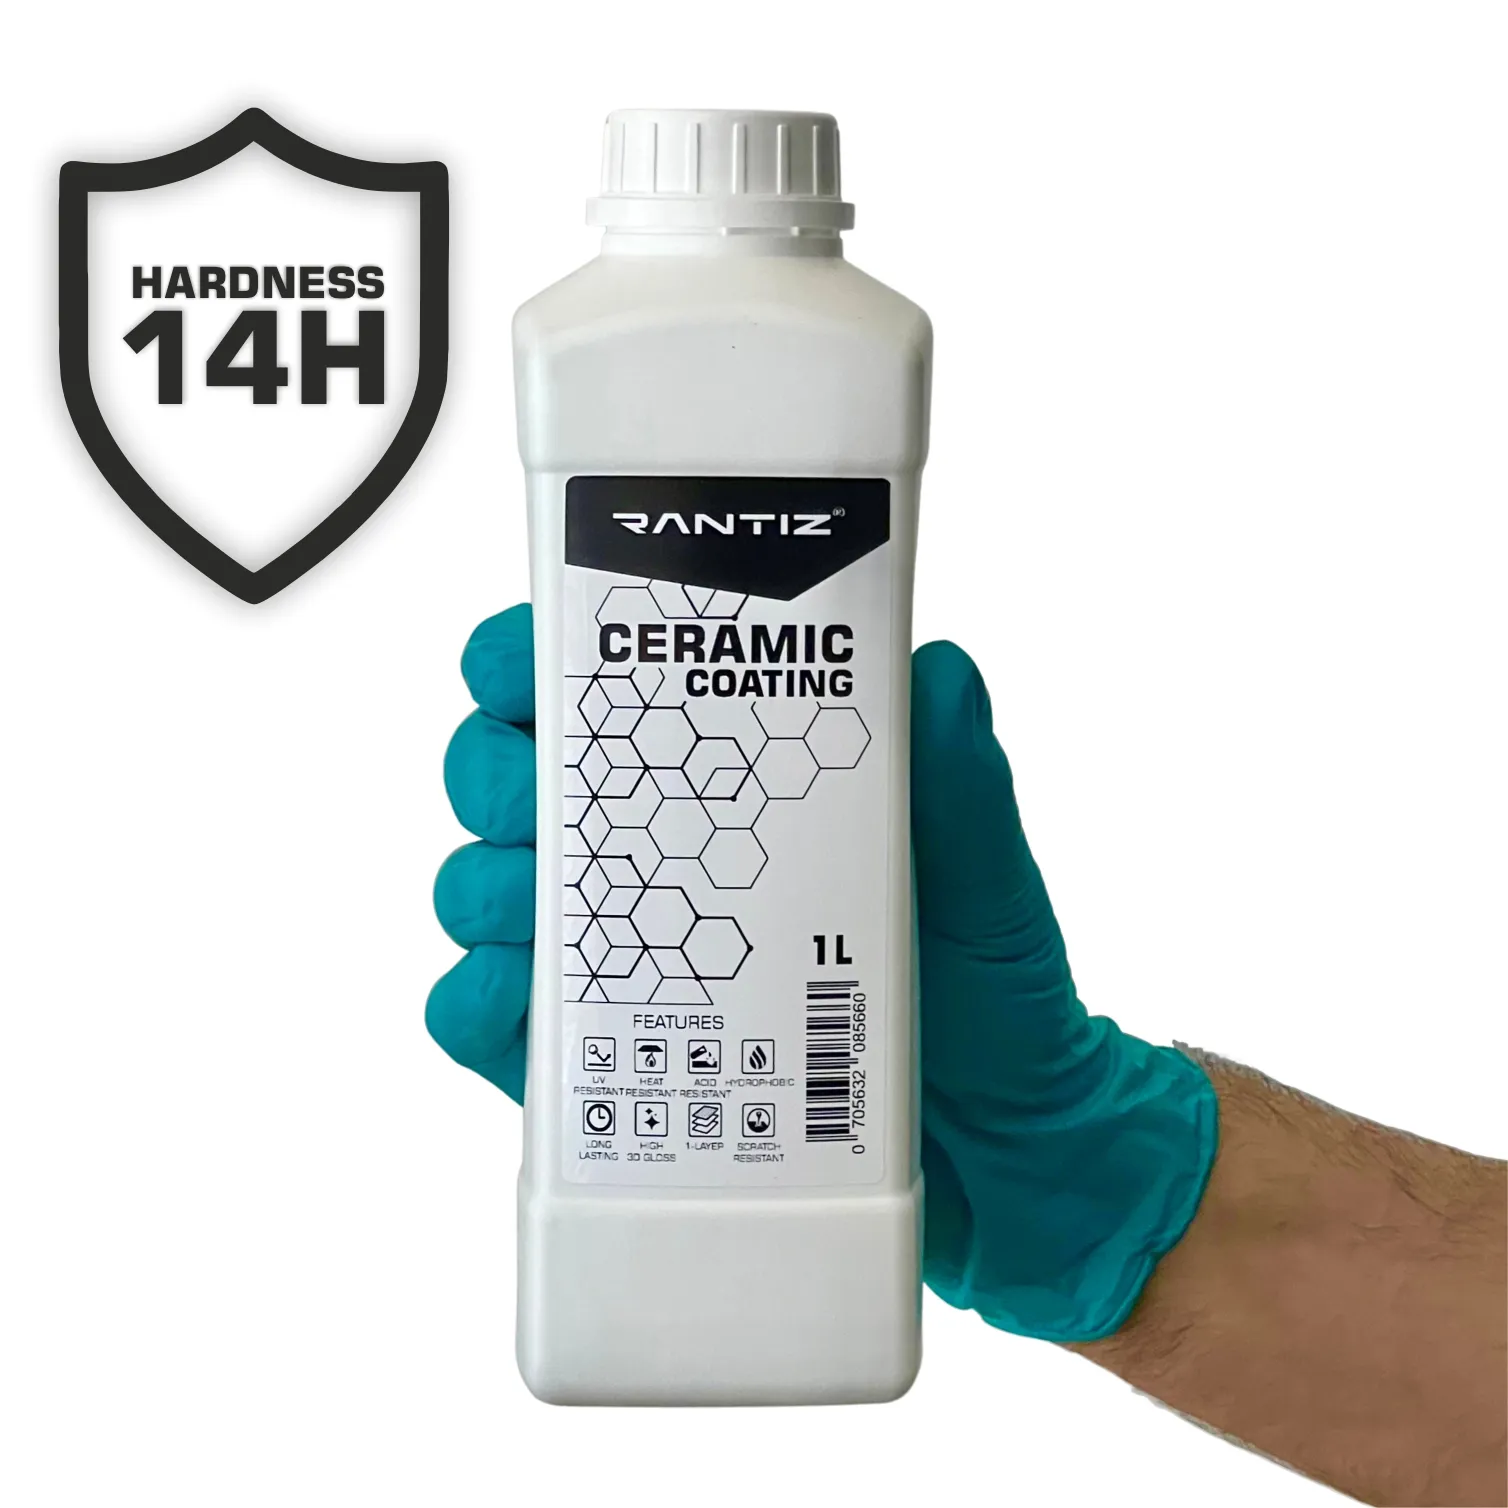 35oz CERAMIC COATING 14H ENOUGH FOR 33 Cars, CAR CARE BODY PAINT PROTECTION SILICONE SUPER HYDROPHOBIC SELF HEALING NANO LIQUID